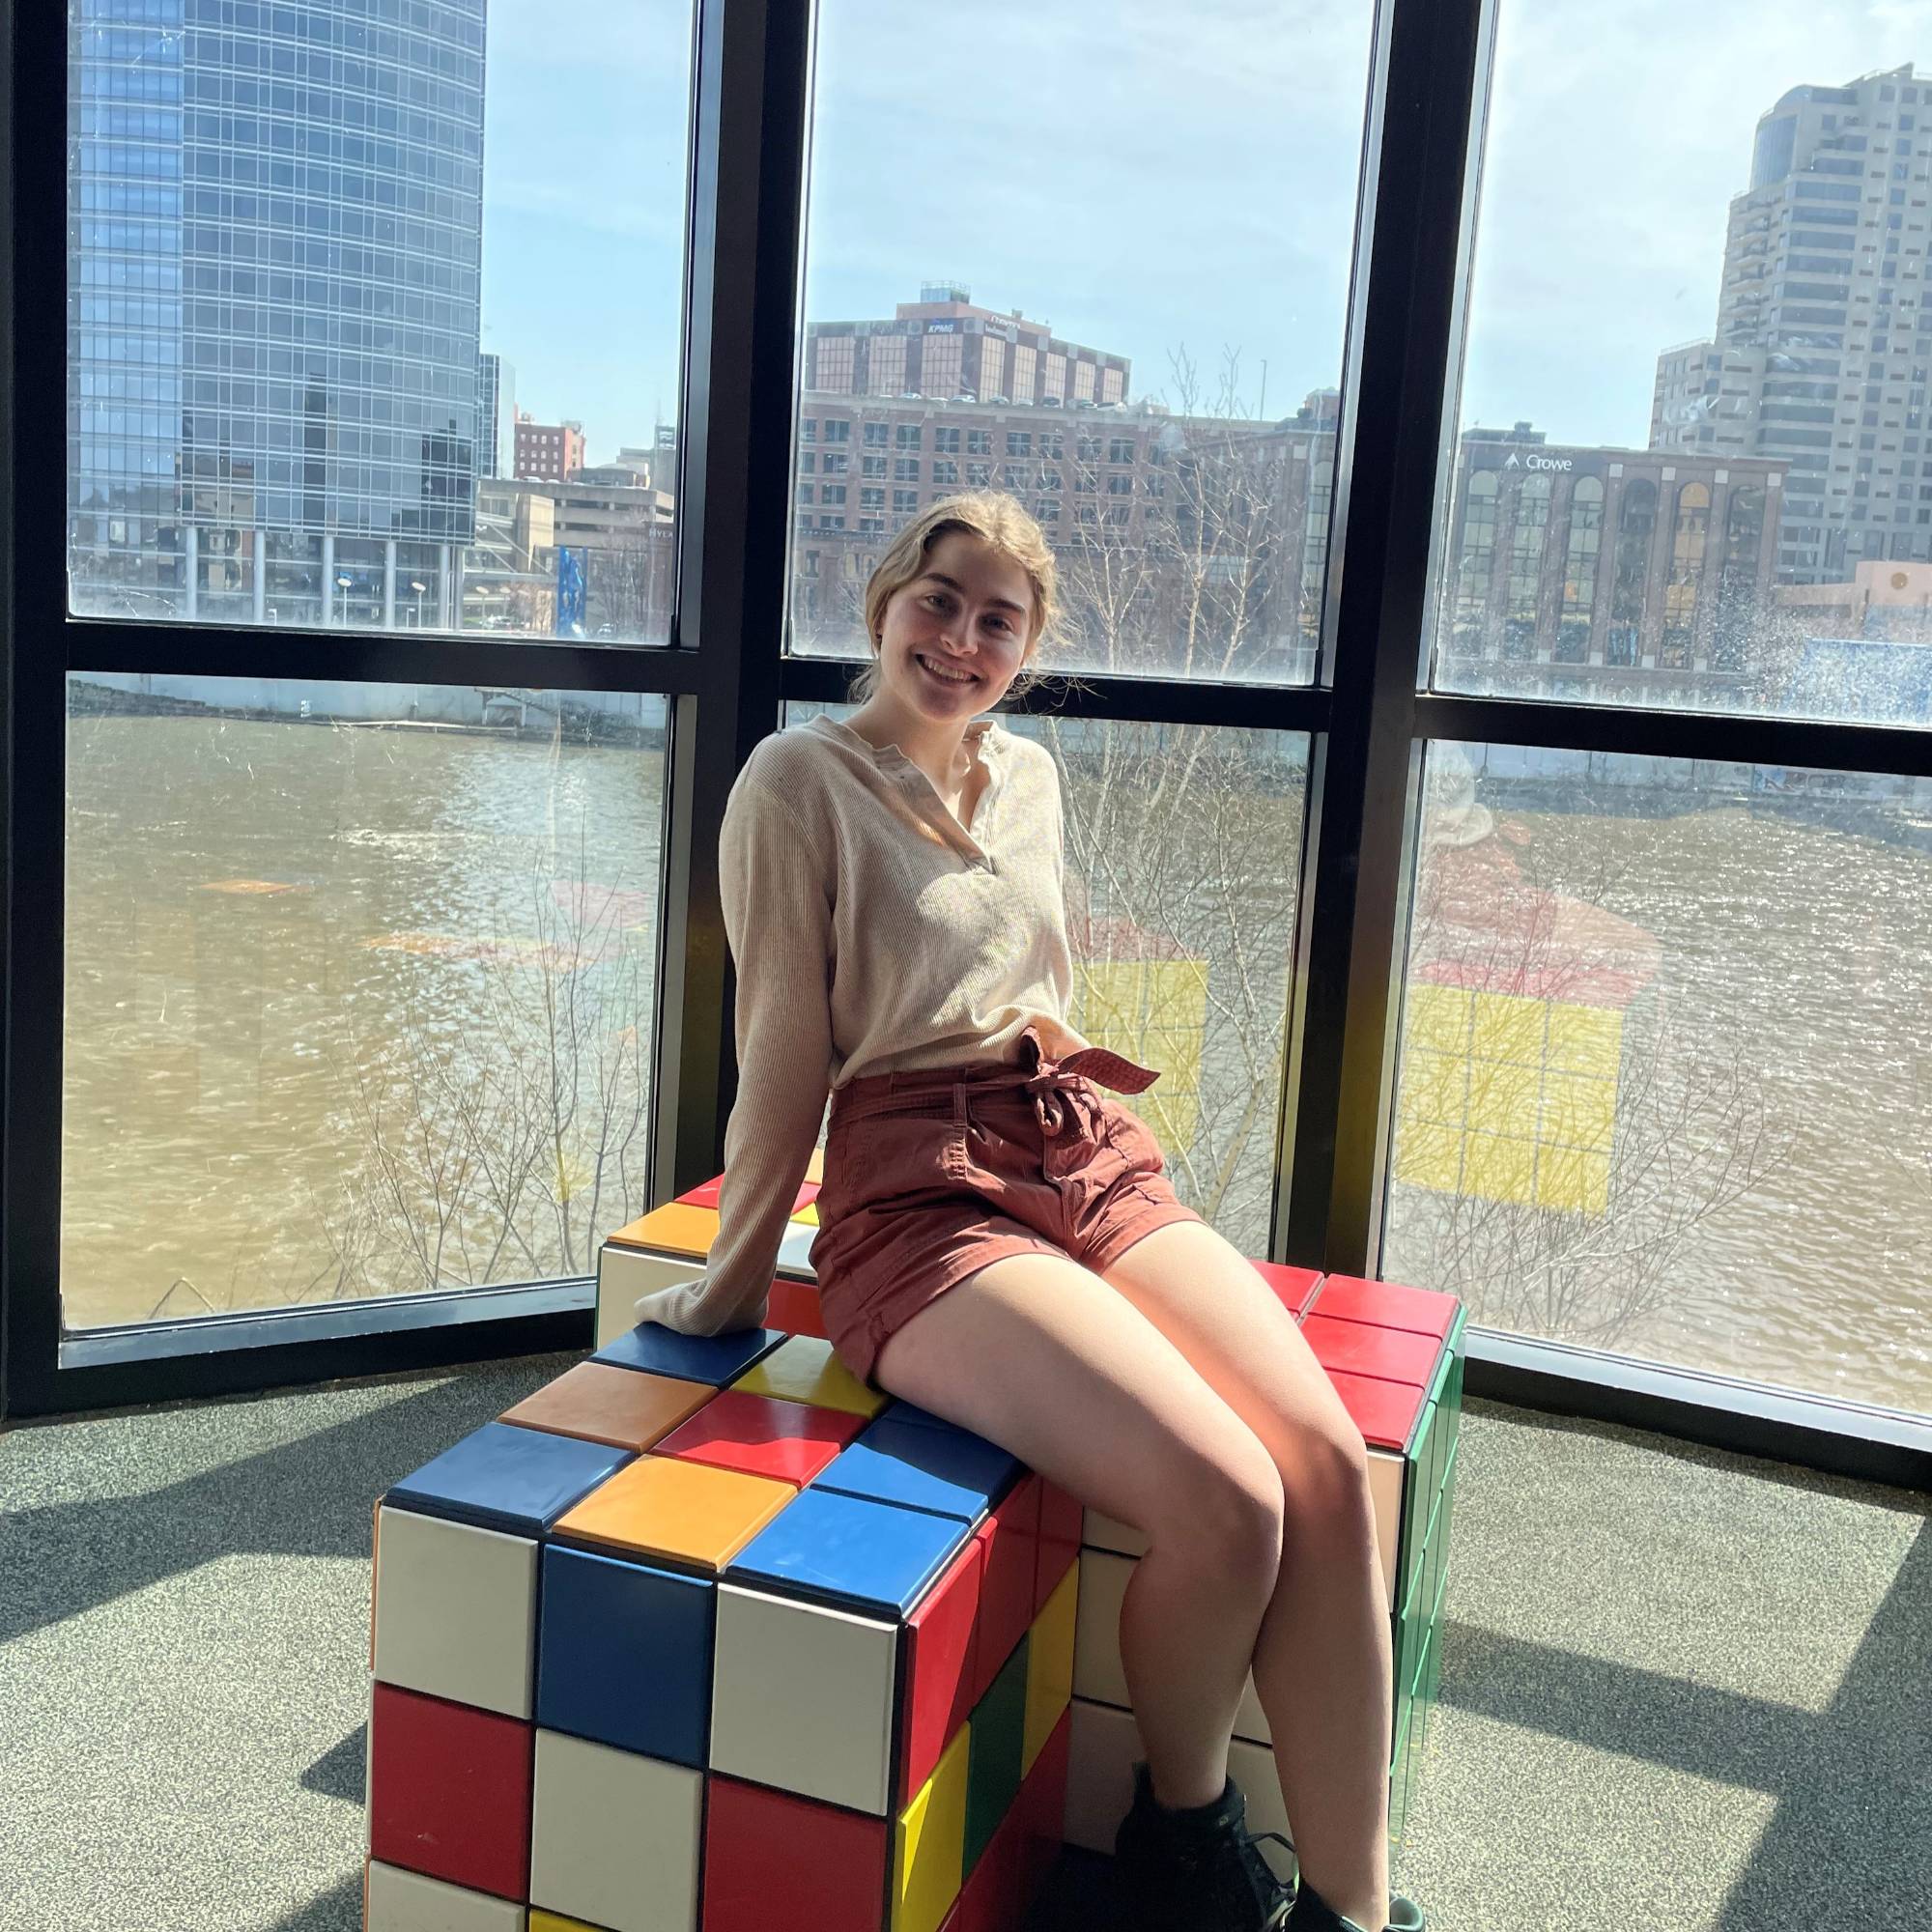 Smiling girl siting on giant rubix cube in front of window